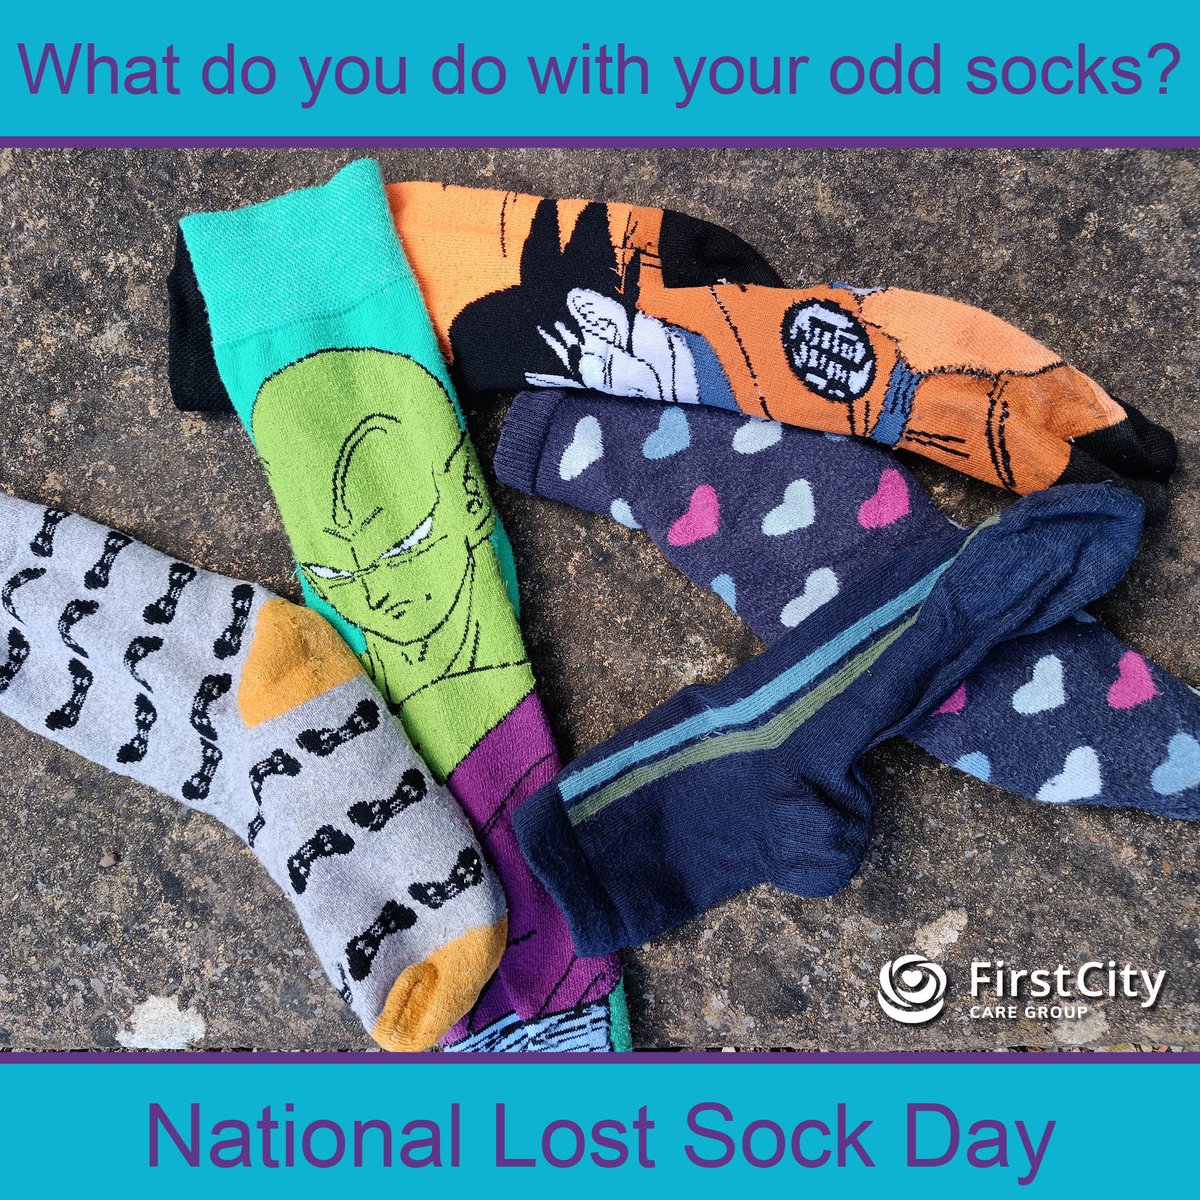 Do you keep them in the hope of finding the matching sock? Turn them into cleaning cloths or a sock puppet? Are they destined for the bin? Or do you embrace wearing an odd pair?

Let us know on this #NationalLostSockDay in the comments...

#lostsock #oddsocks #socks